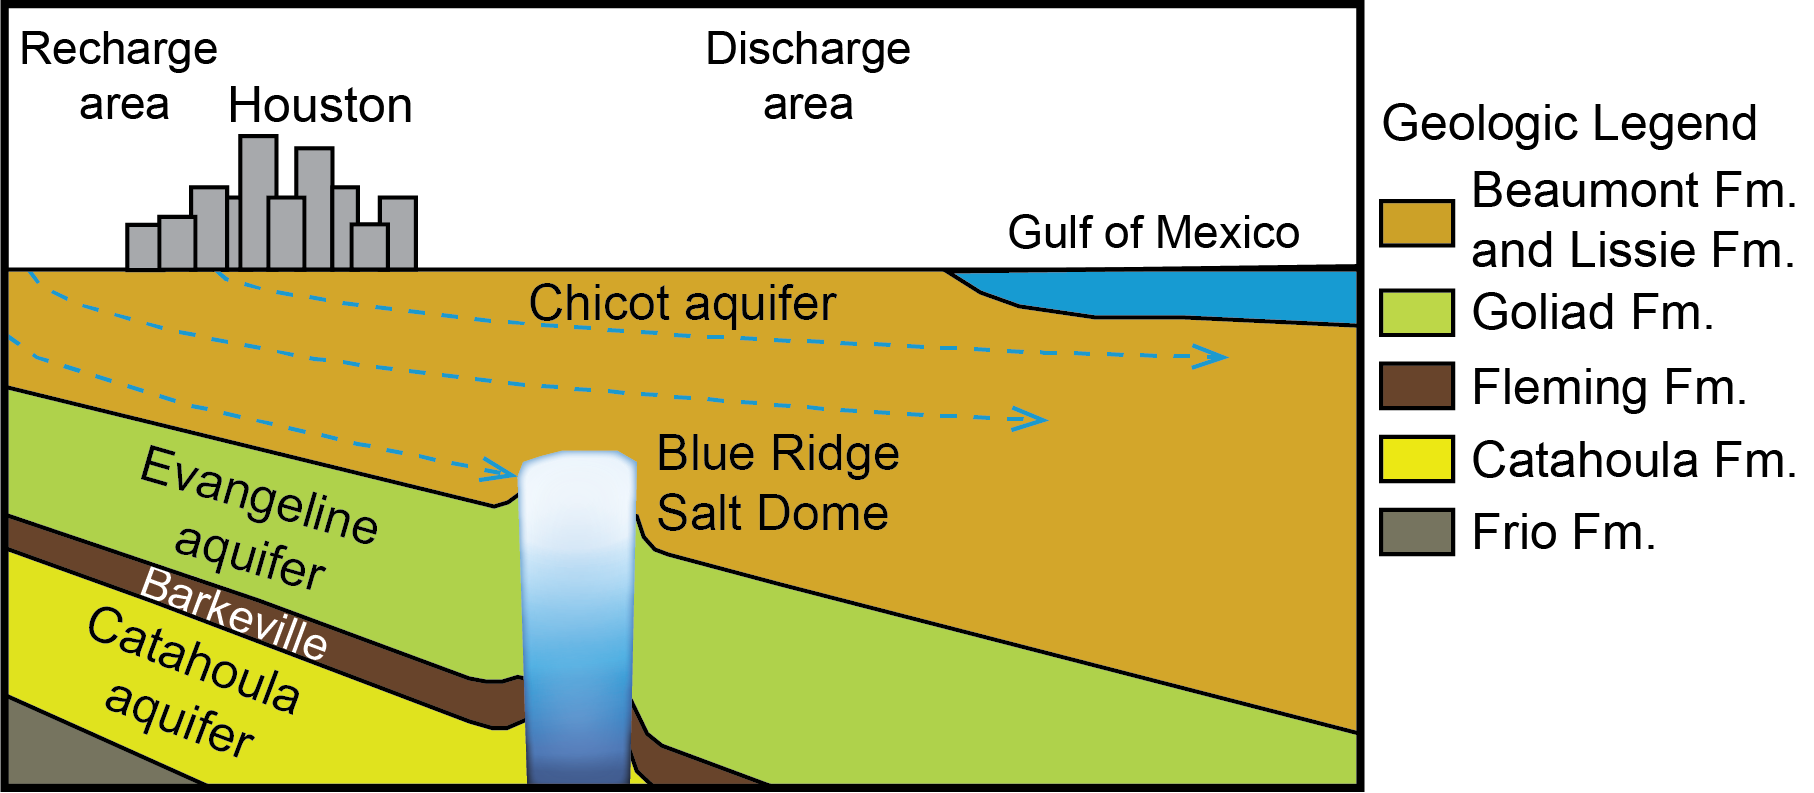 Schematic cross-section of aquifers in Greater Houston area